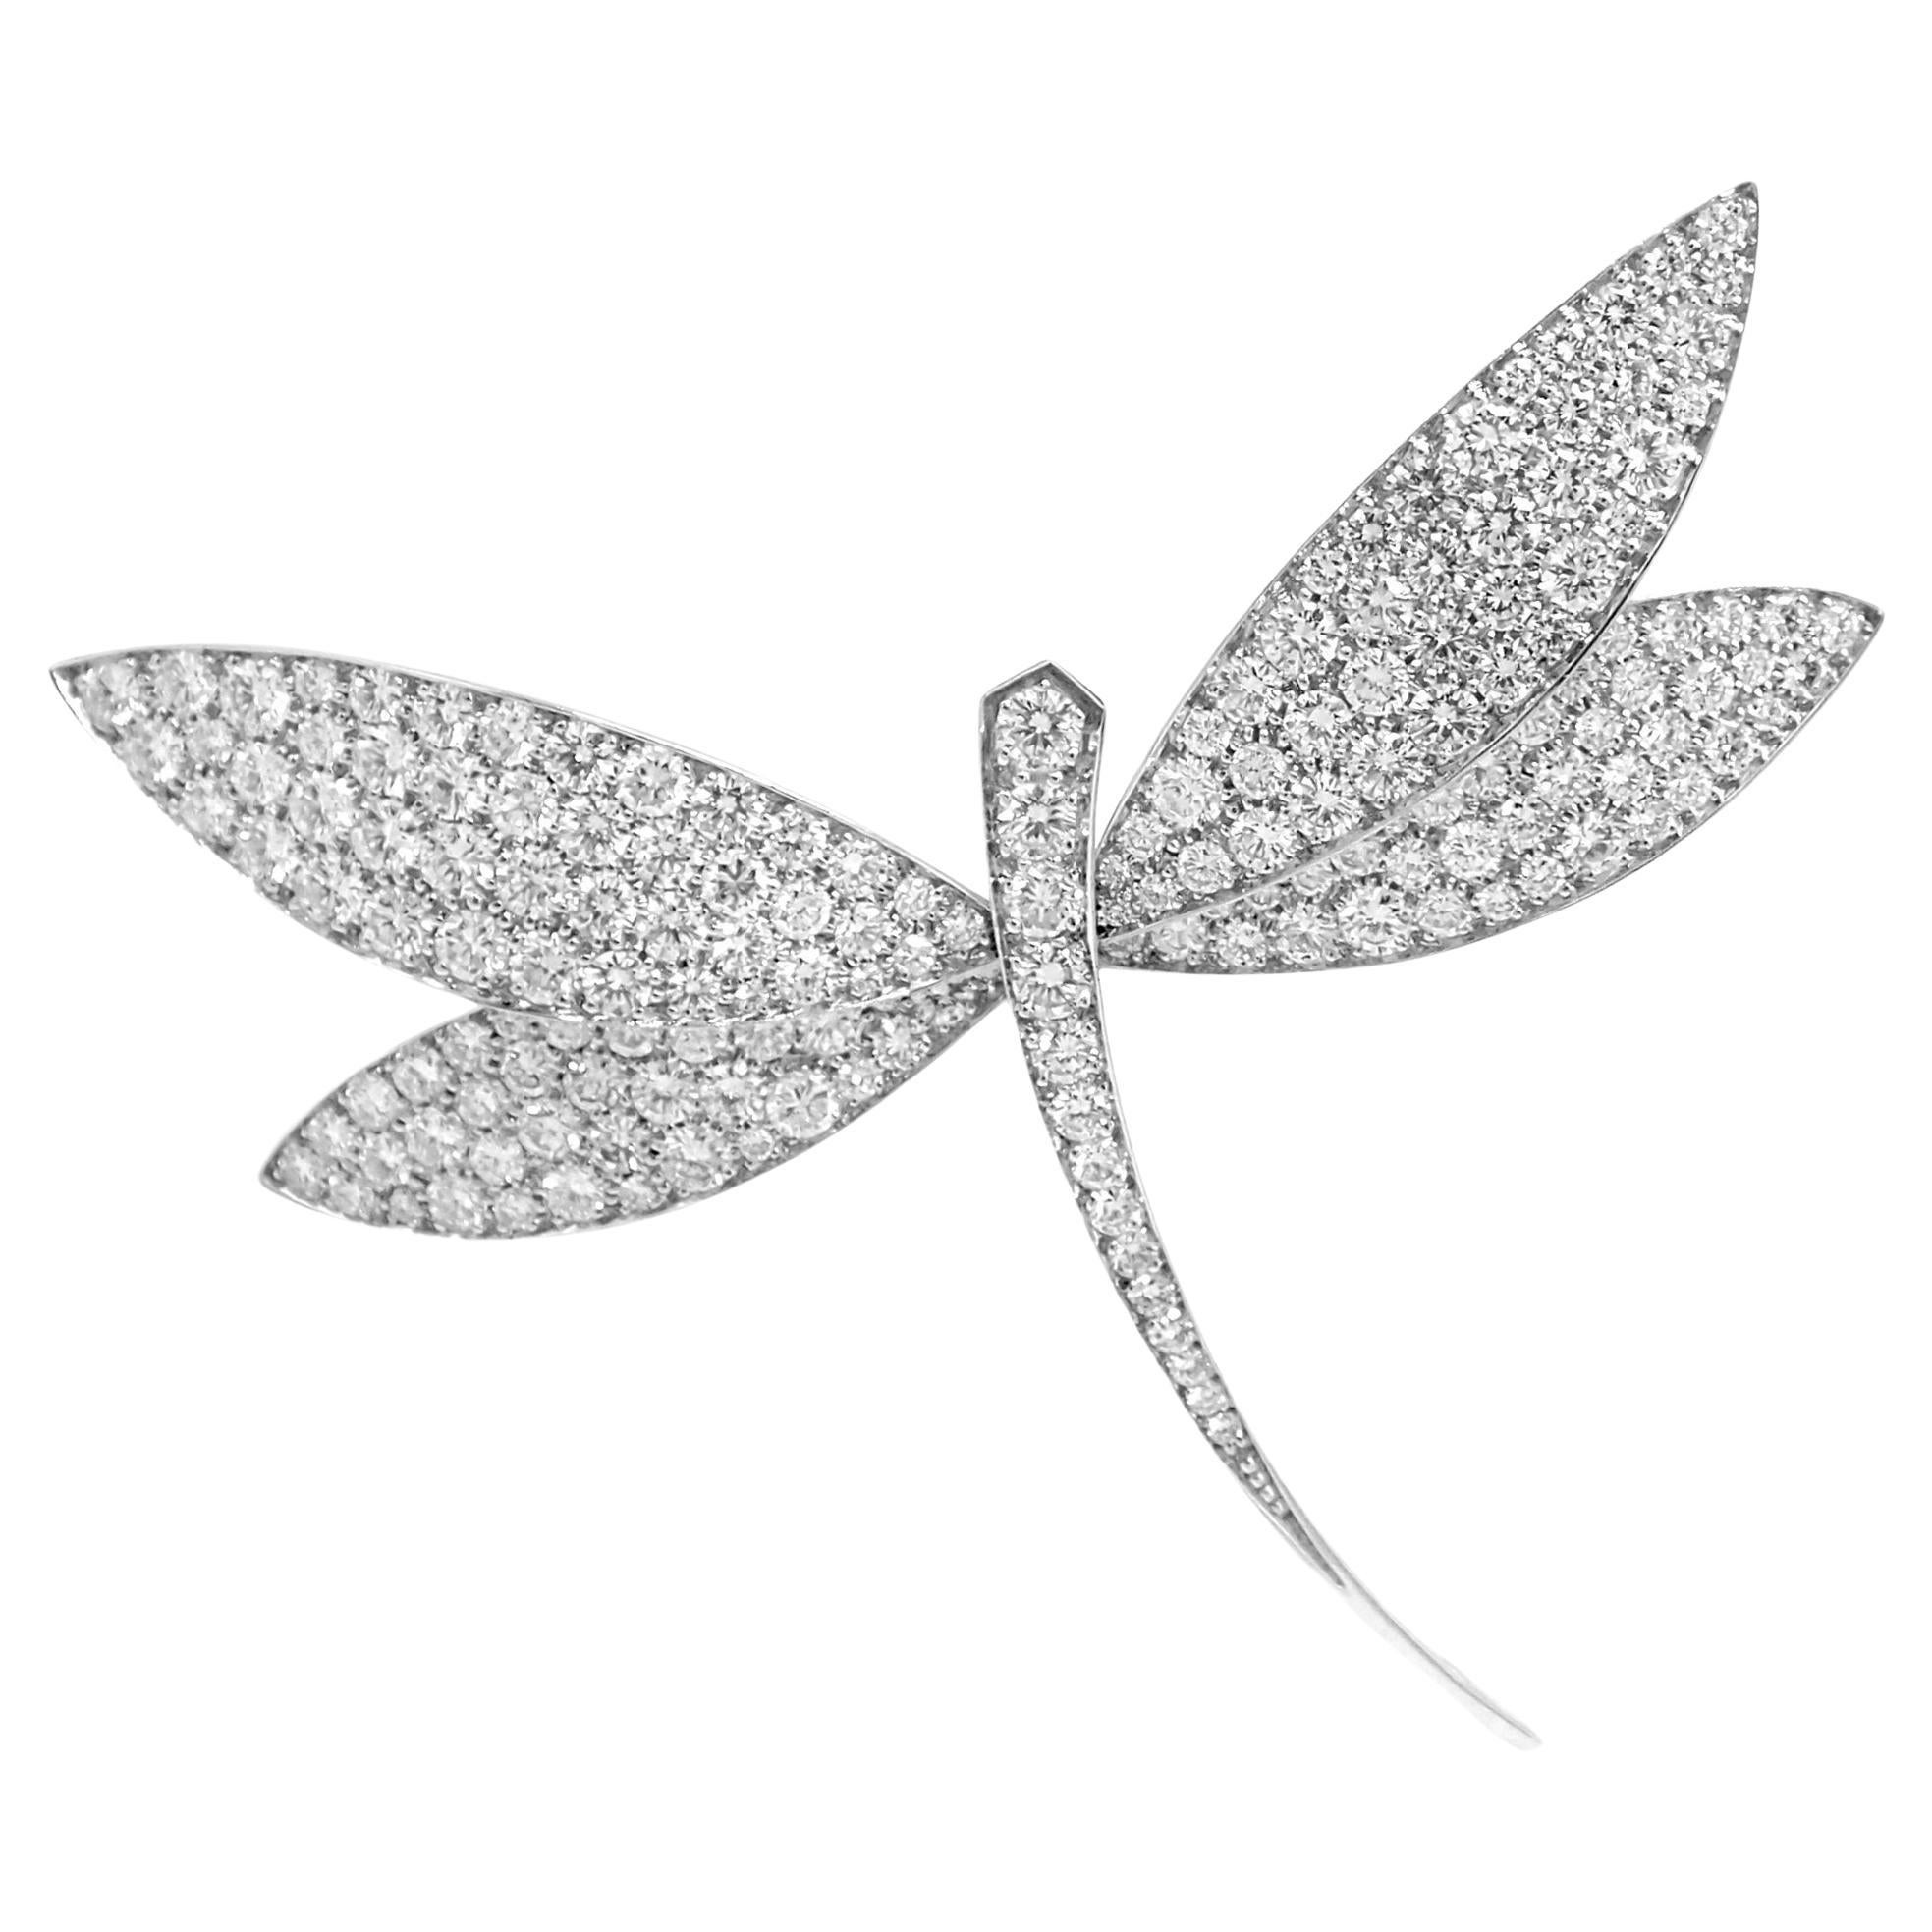 Van Cleef & Arpels Dragonfly Diamond Extra Large White Gold Pin Brooch